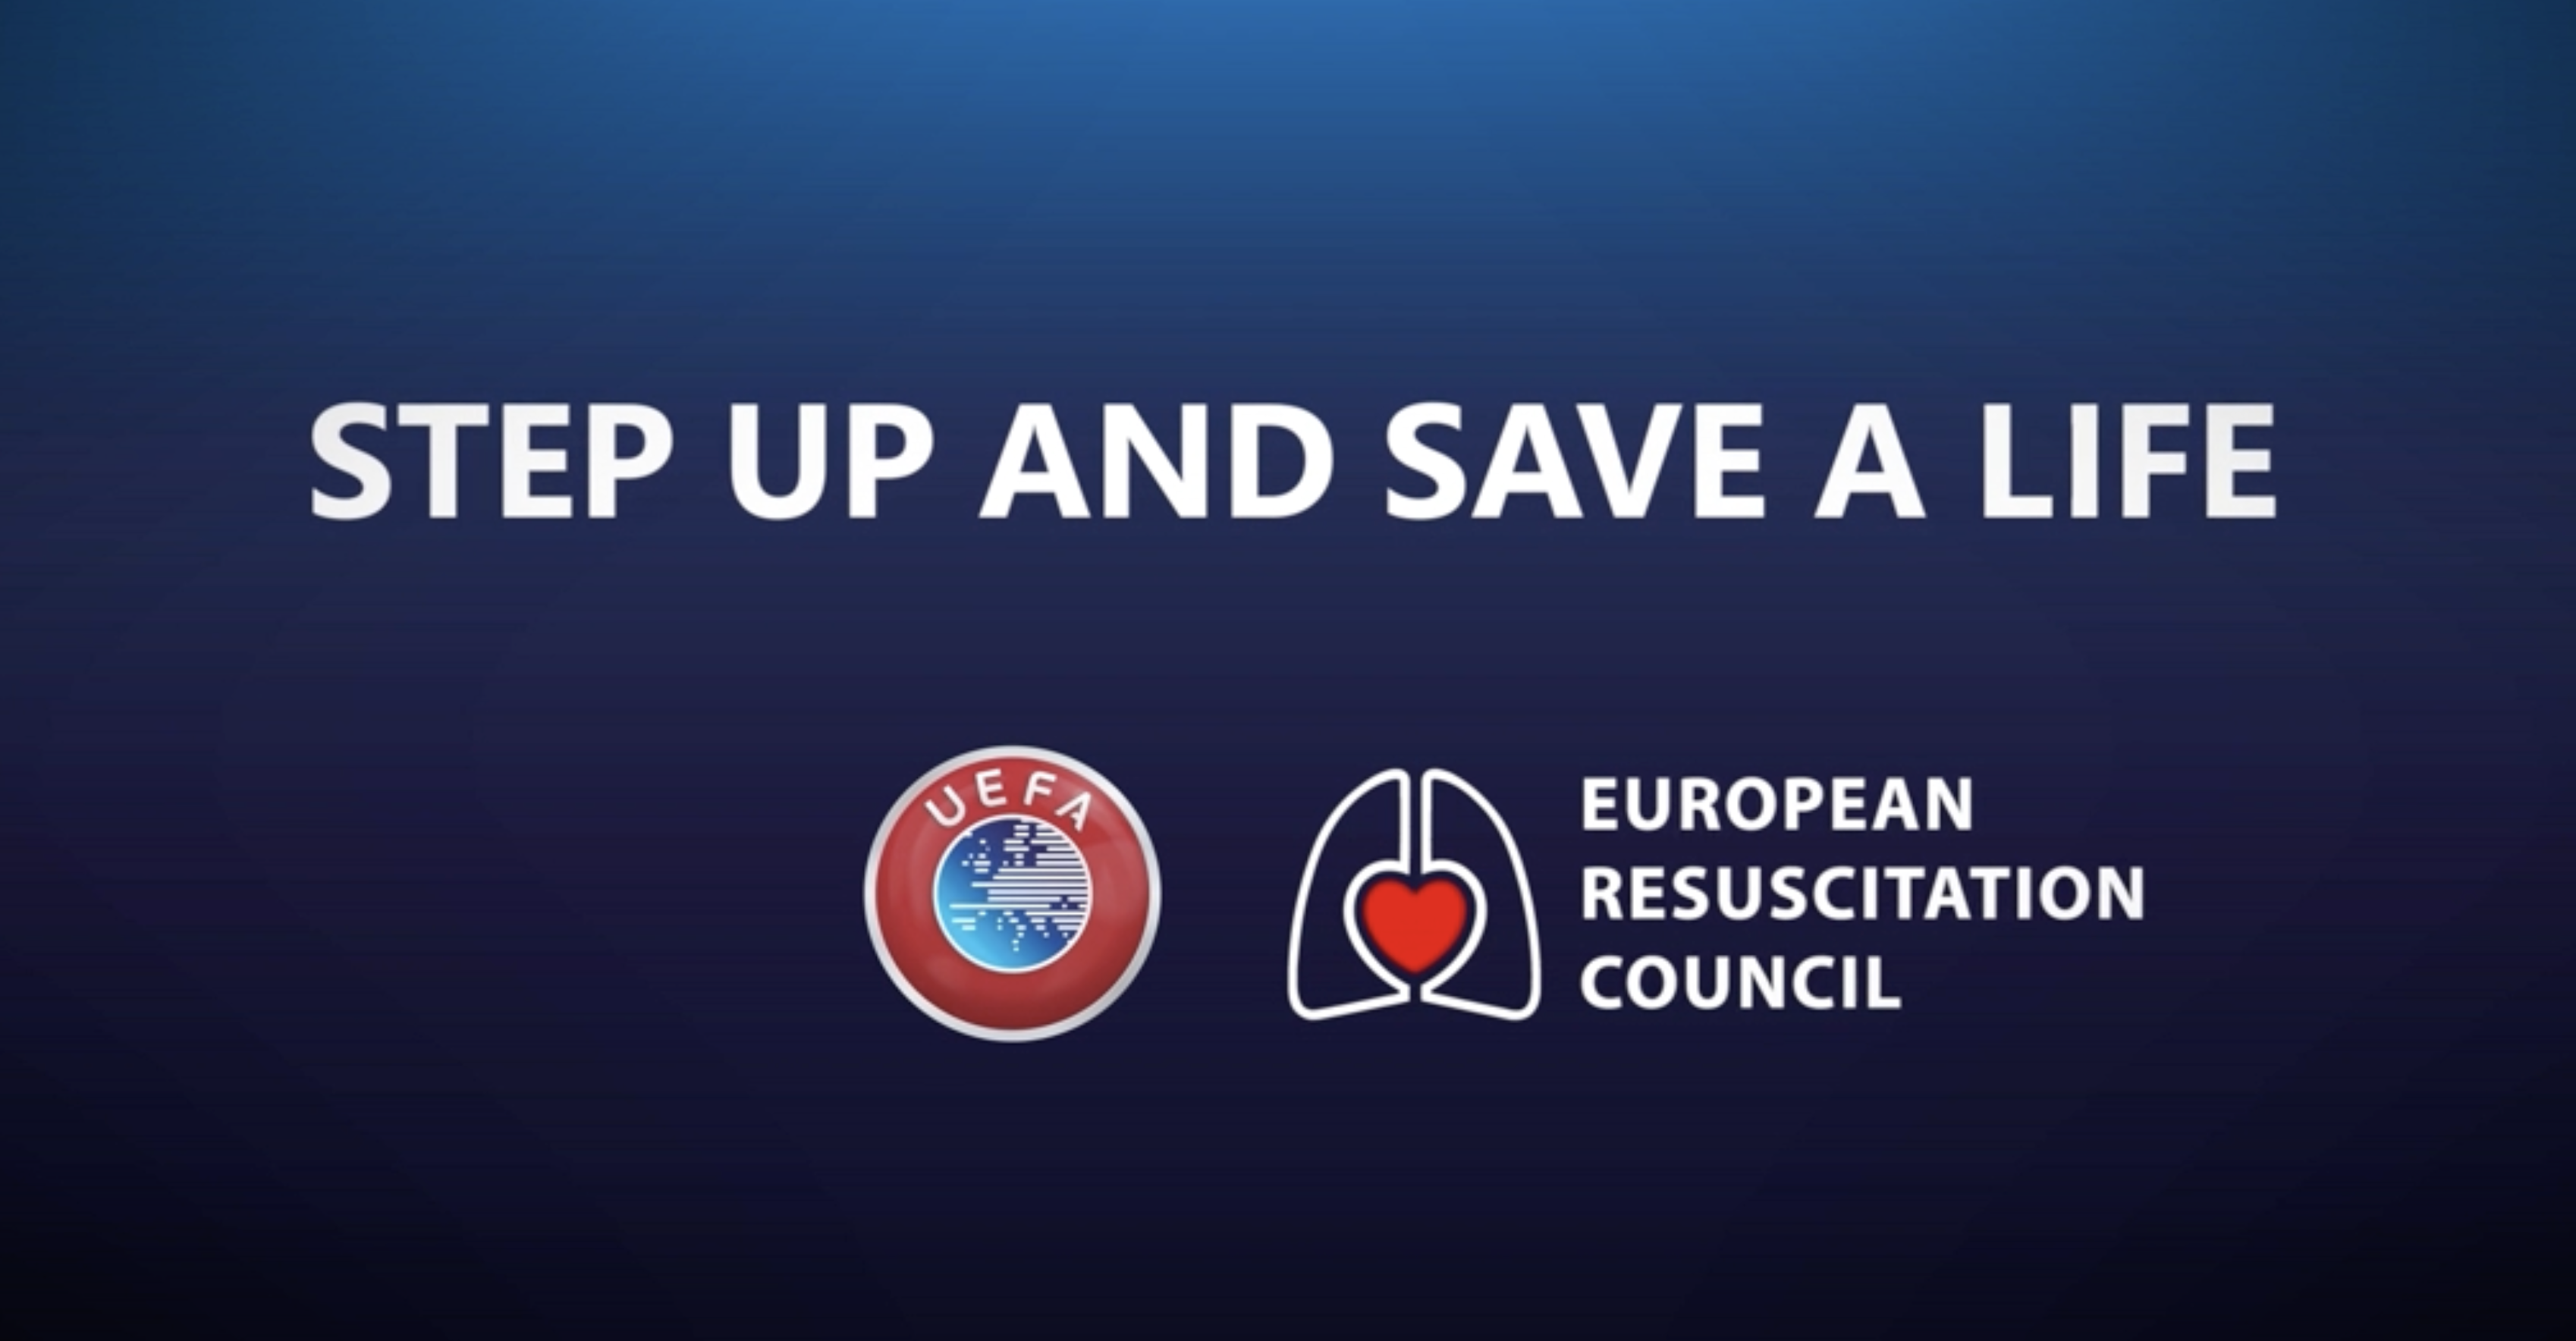 UEFA and European Resuscitation Council team up to promote CPR training and education